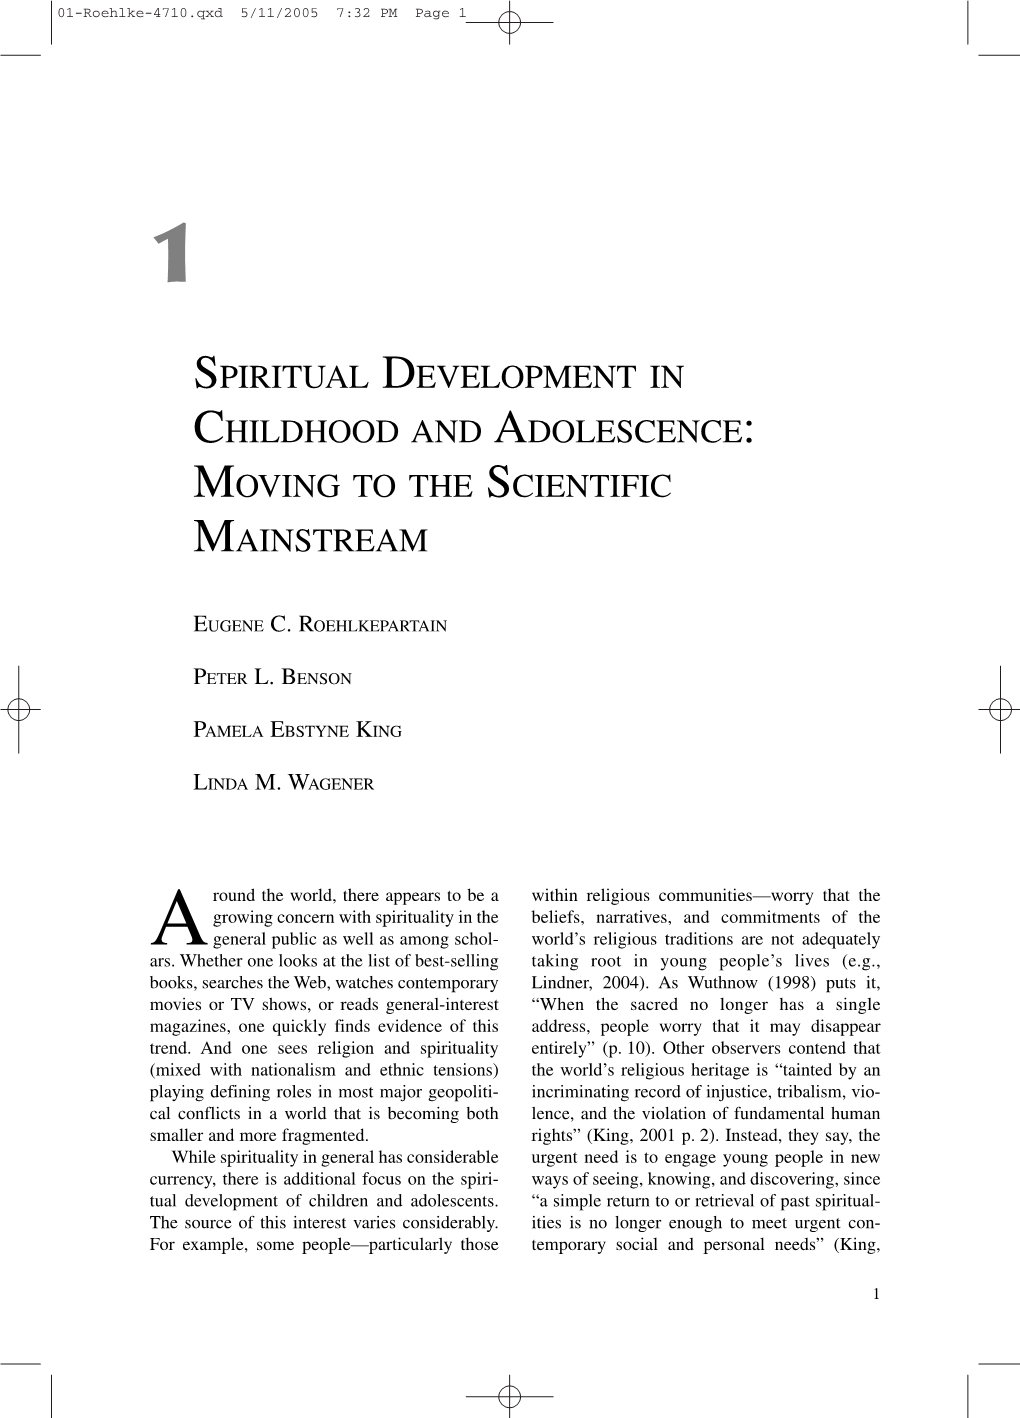 Spiritual Development in Childhood and Adolescence: Moving to the Scientific Mainstream